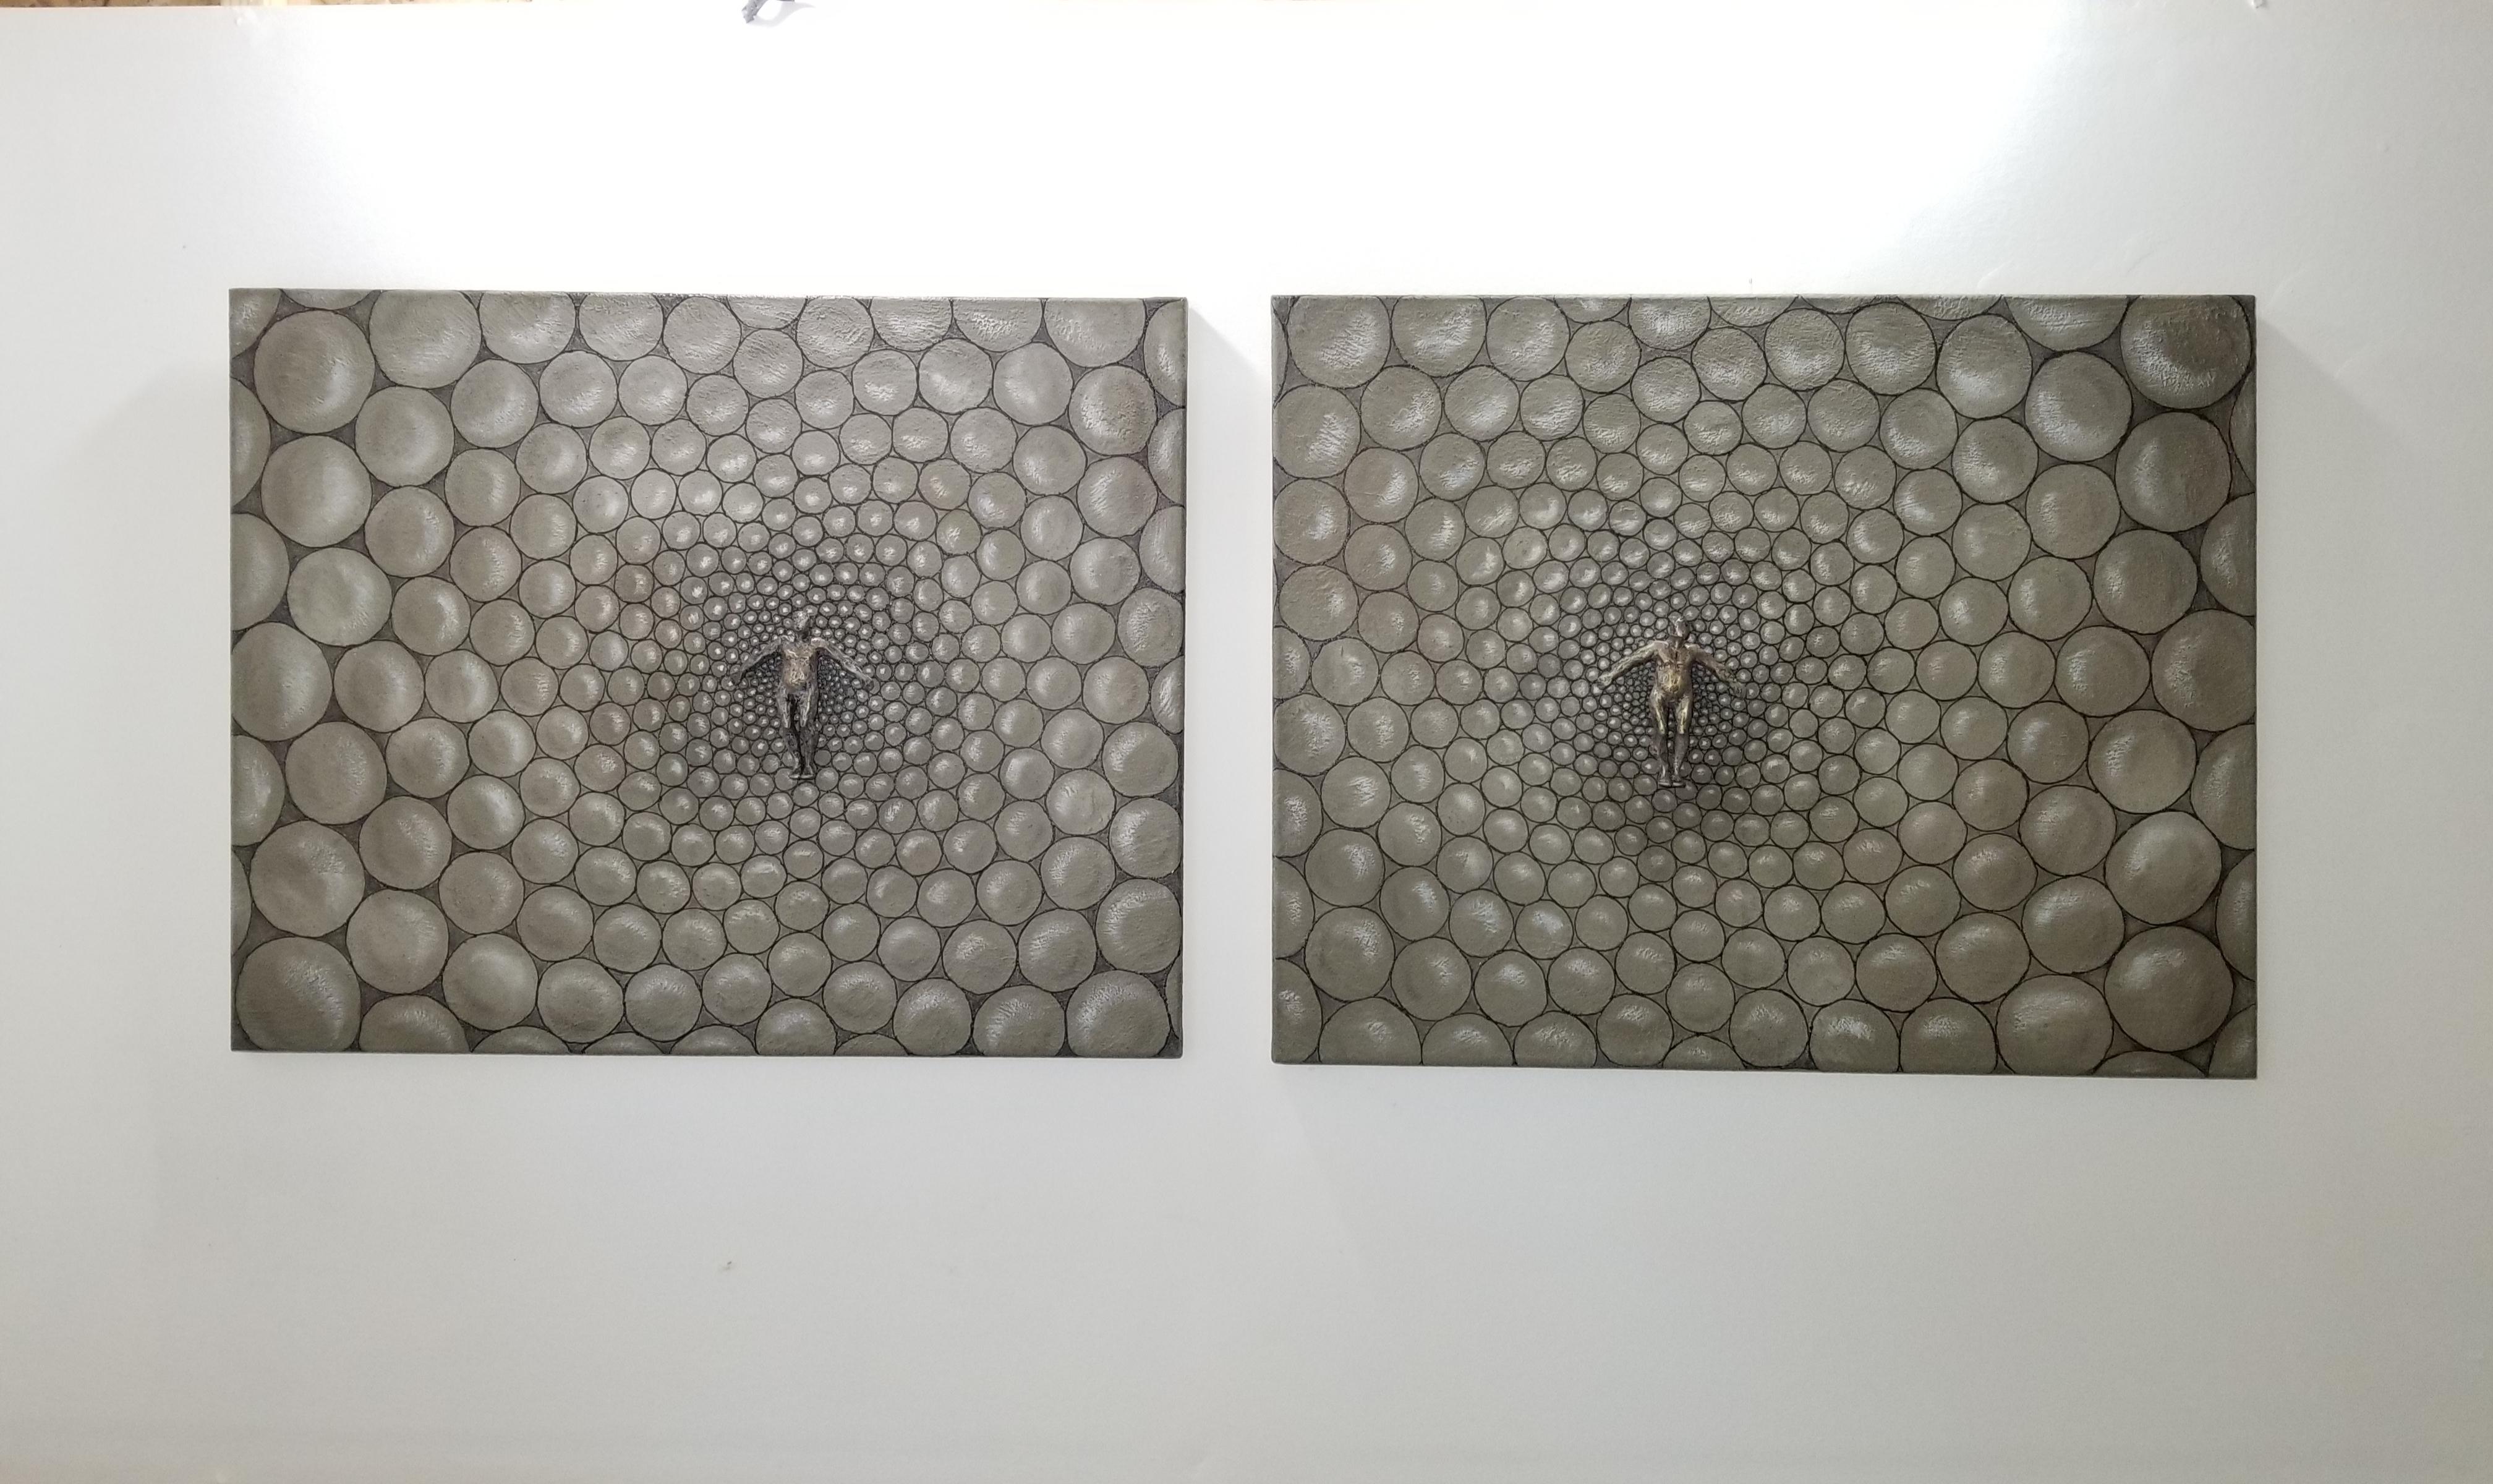 <p>Artist Comments<br>Artist Yelitza Diaz displays a diptych with two central figures on each canvas. Yelitza draws circular patterns surrounding them to project the sensation of volume. A modern depiction of spirituality and growth unfolds in the